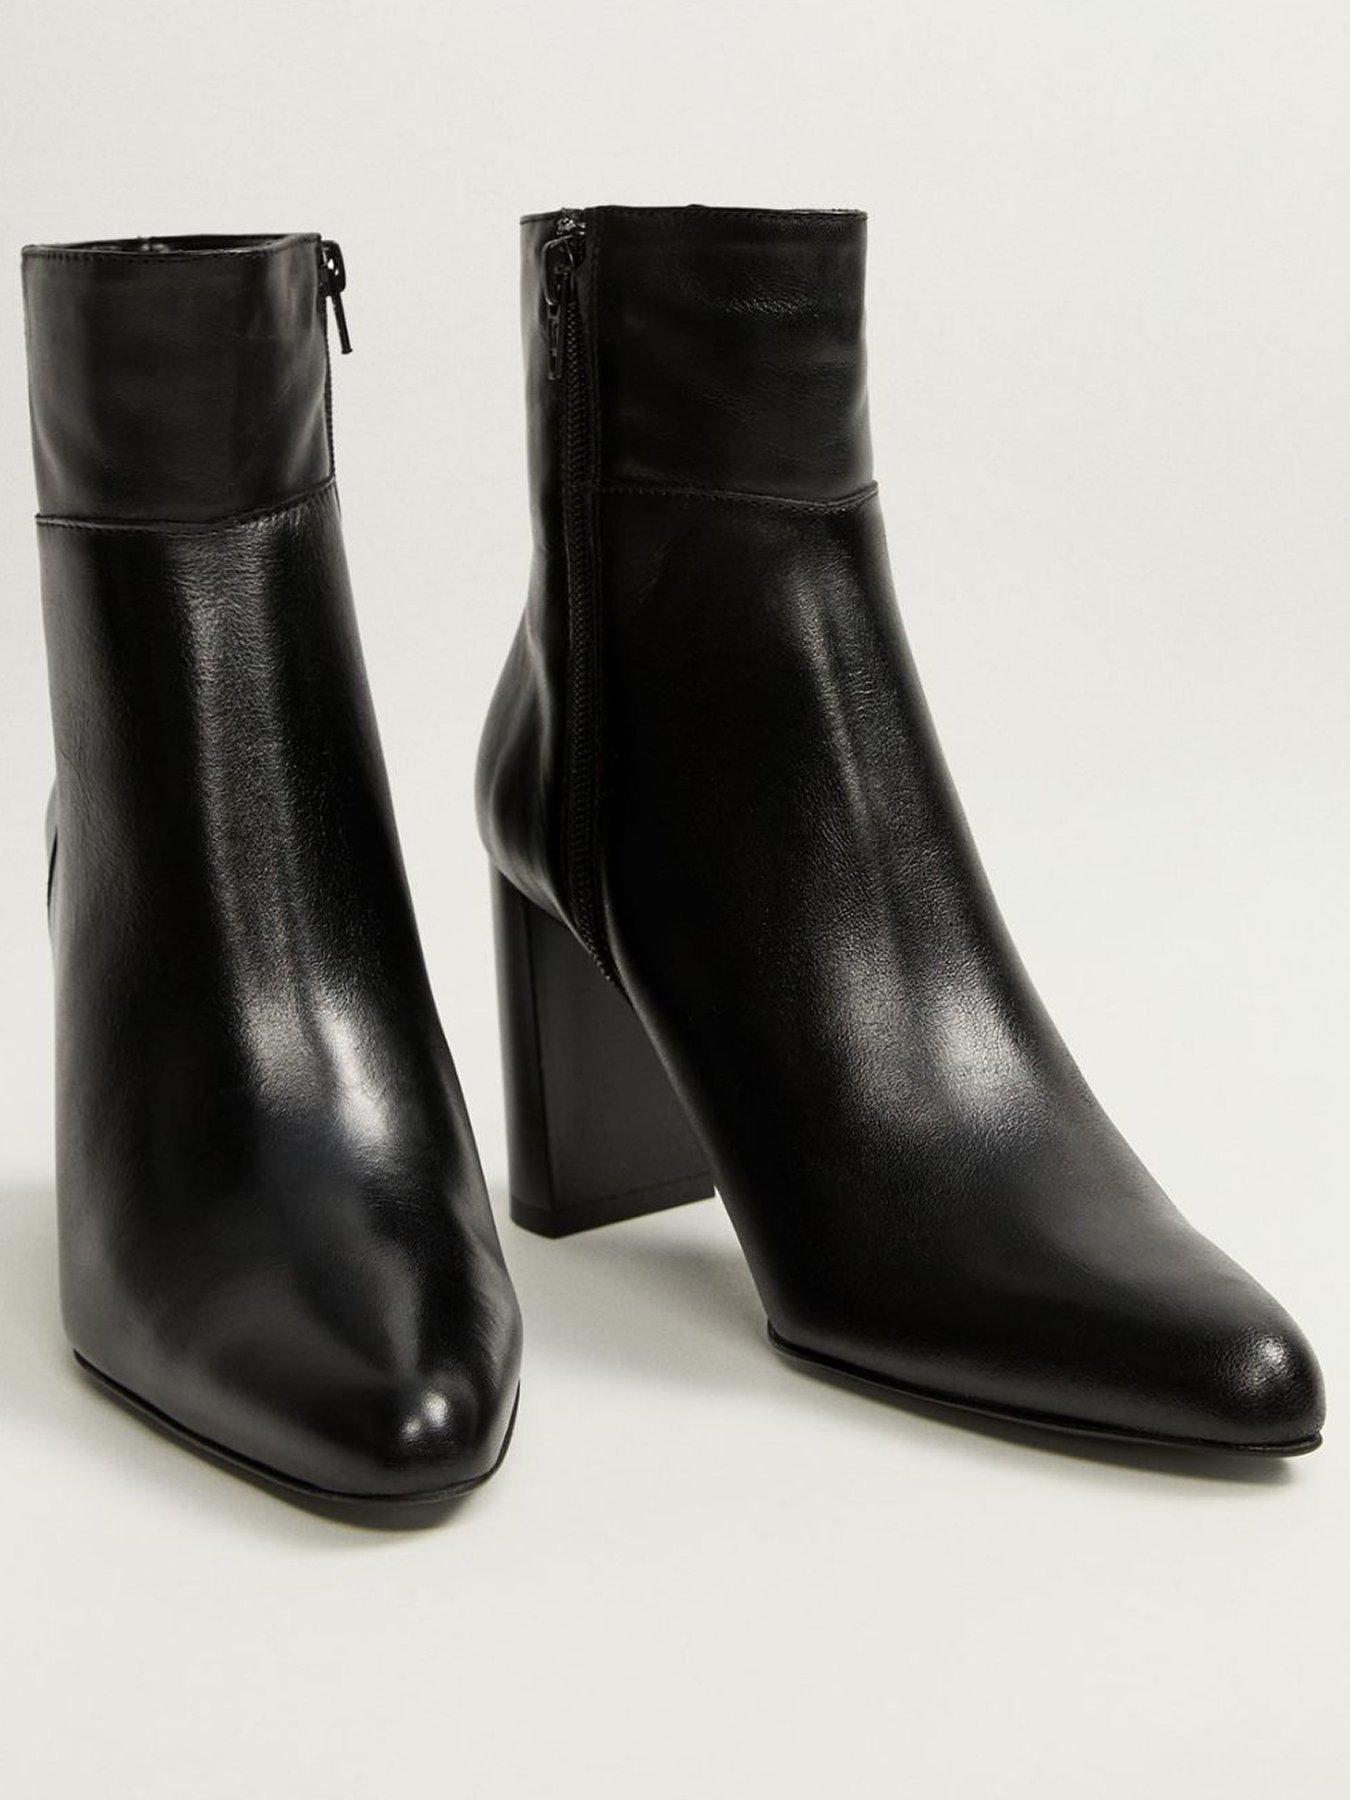 slim ankle boots uk